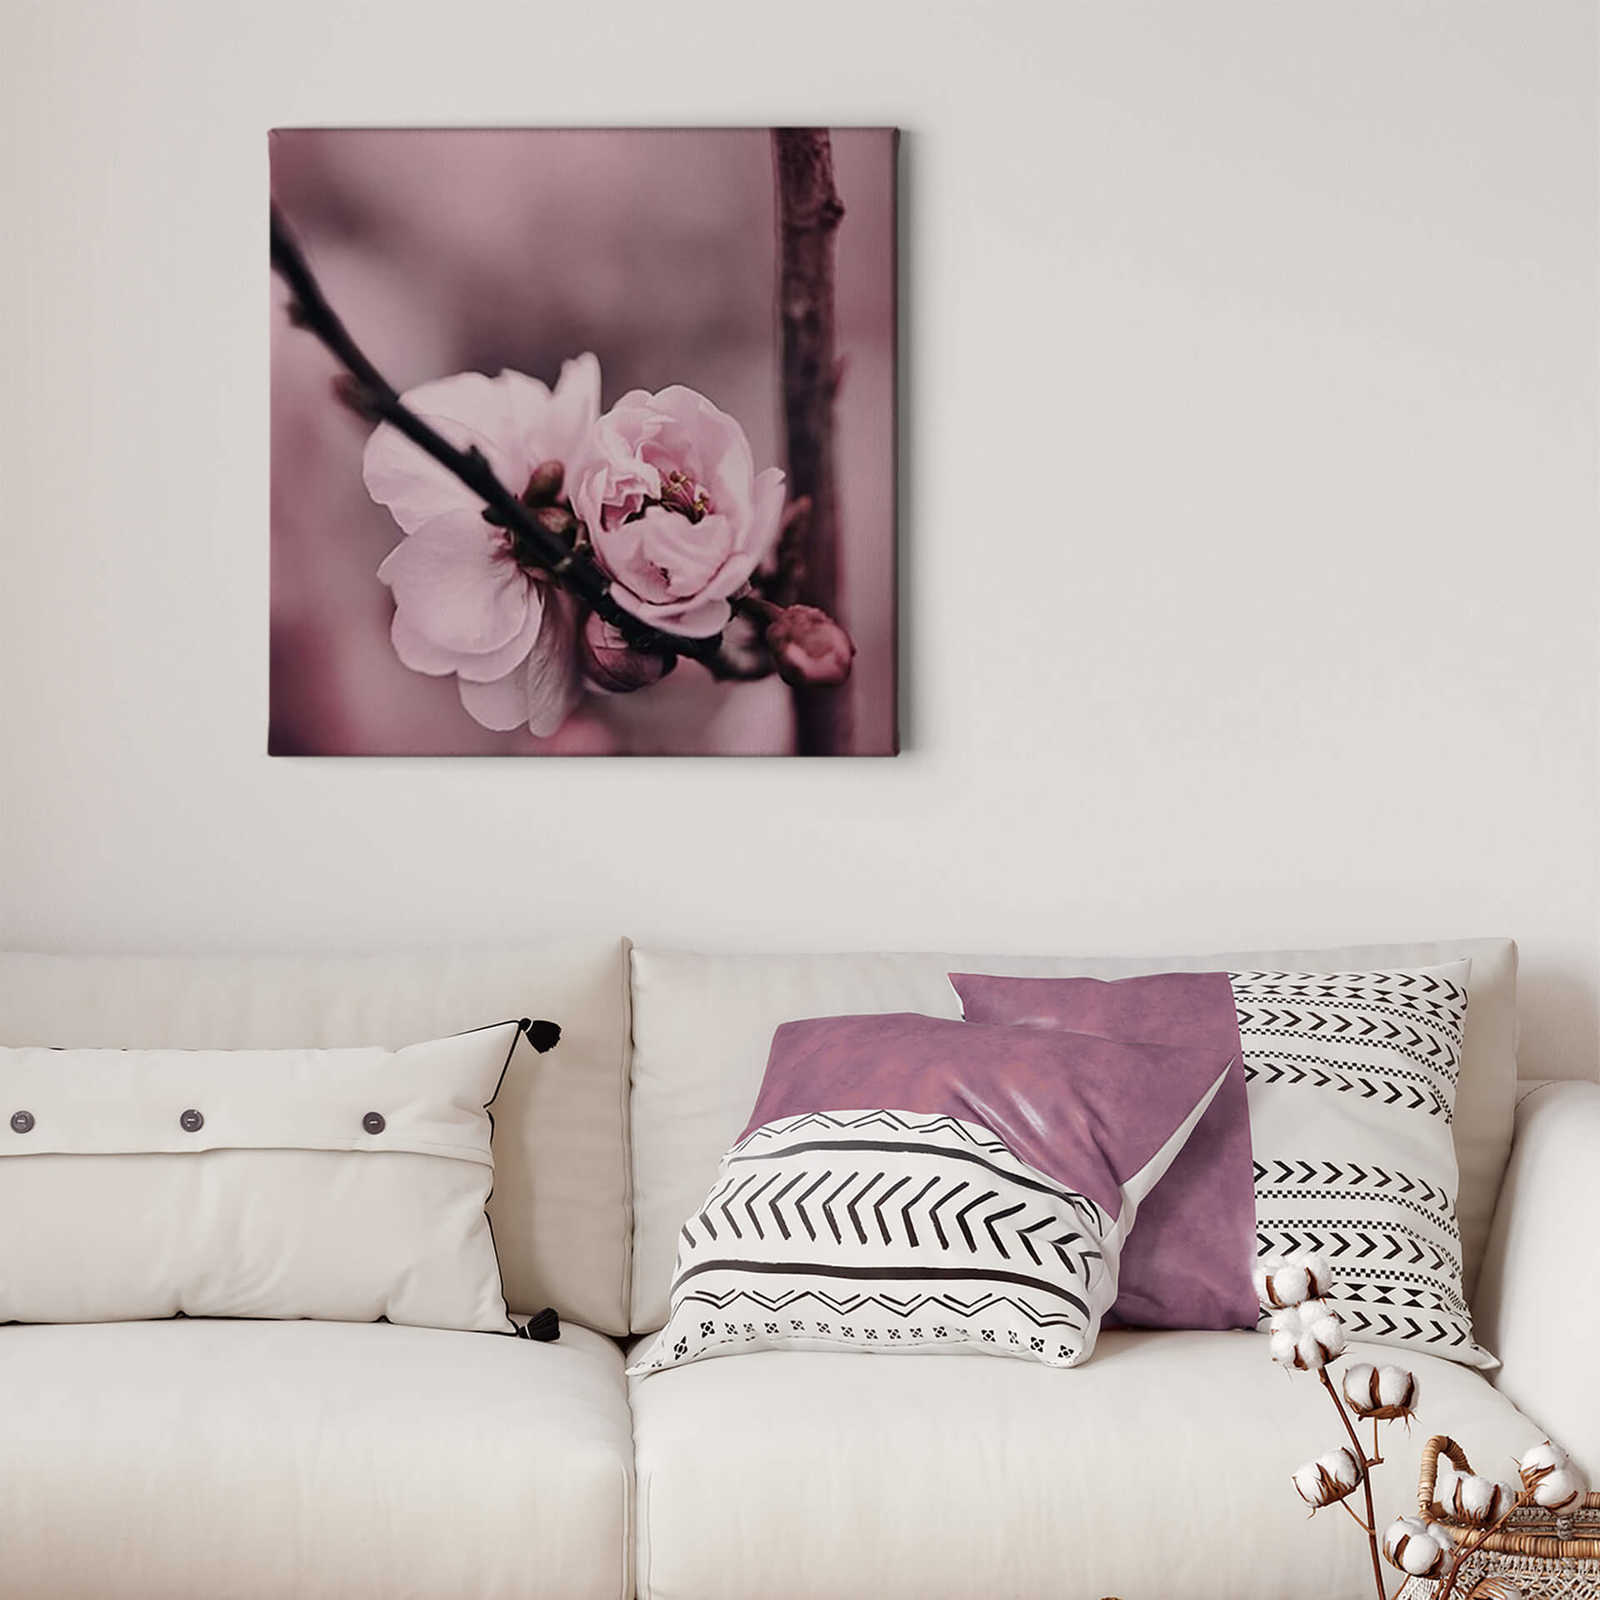             Square canvas print flower bud – pink
        